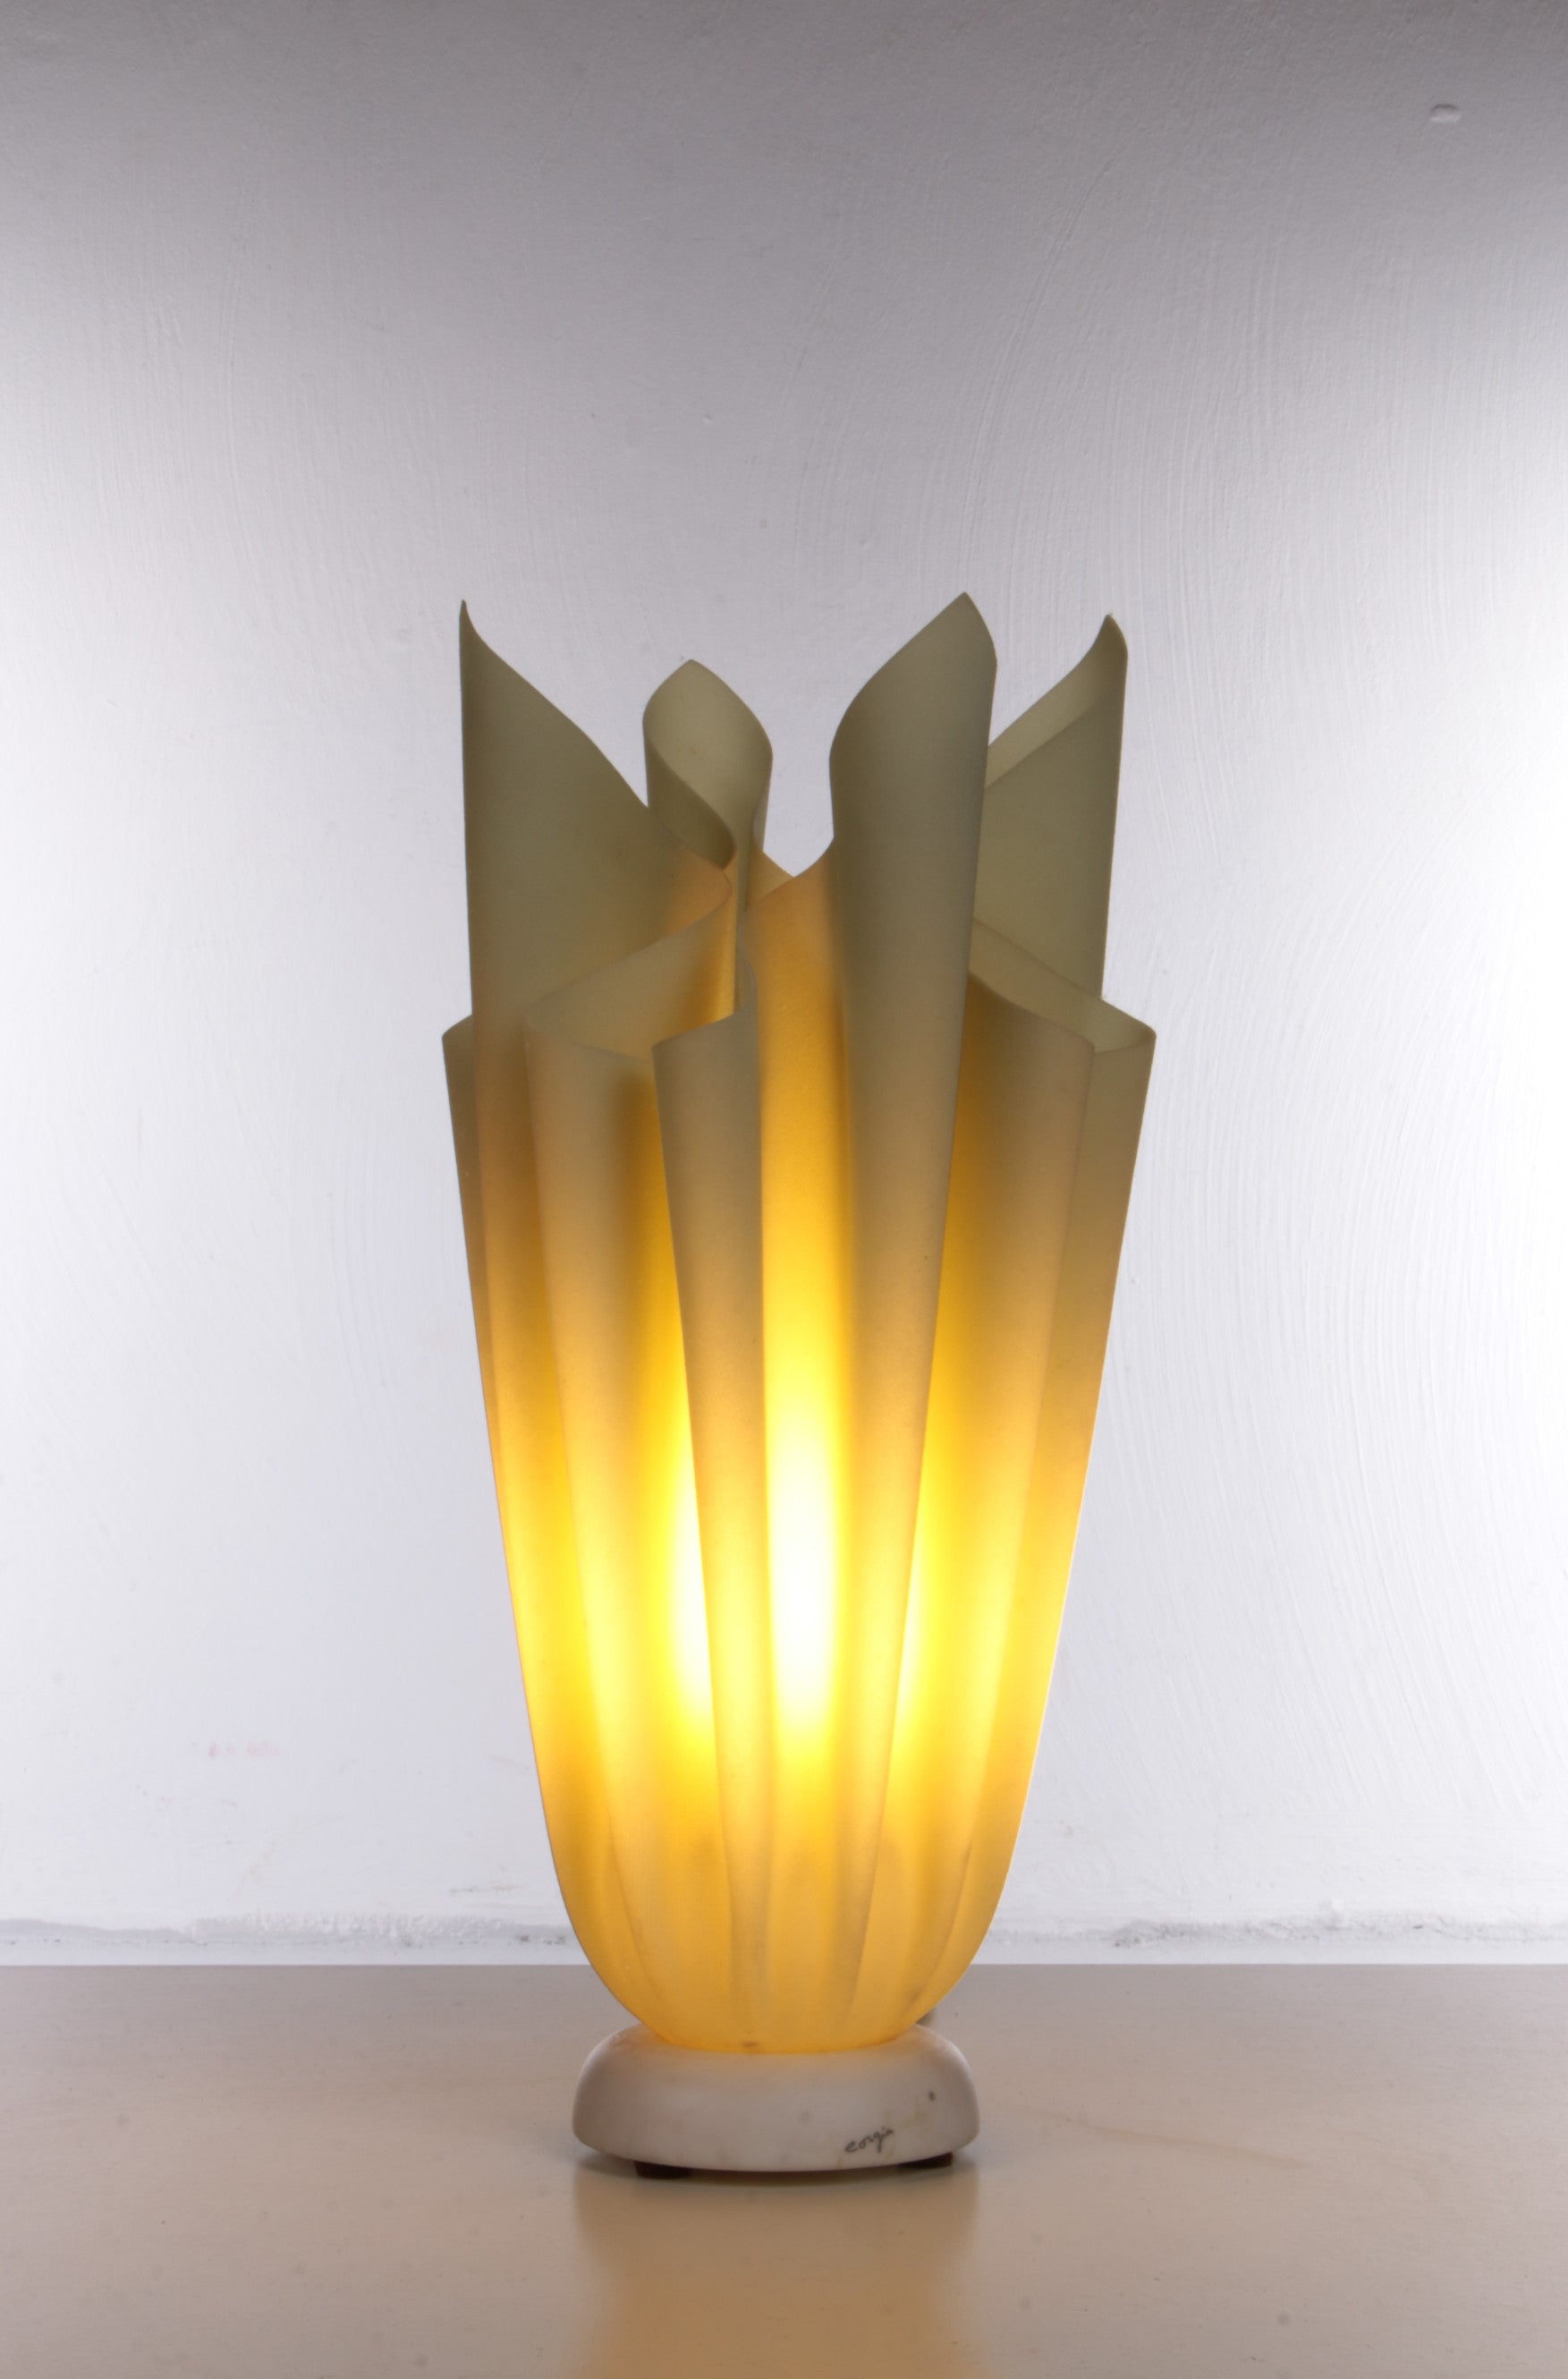 French "Athens" draped table lamp by Georgia Jacob, 1970s